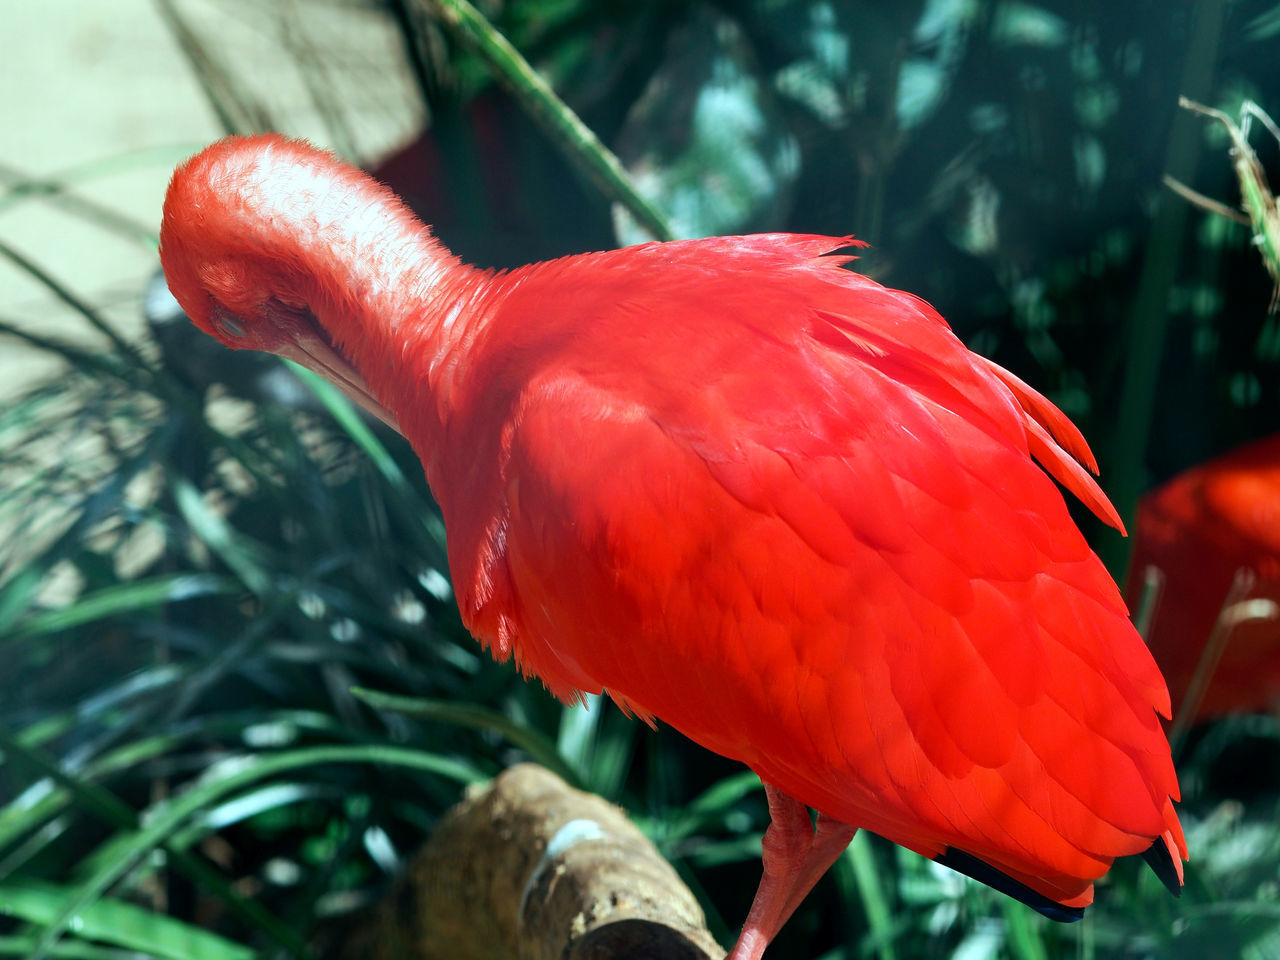 red, bird, animal themes, animal, animal wildlife, beak, flower, one animal, nature, tropical climate, plant, ibis, parrot, wildlife, vibrant color, animal body part, close-up, tree, no people, tropical bird, focus on foreground, scarlet macaw, feather, forest, outdoors, pink, beauty in nature, flamingo